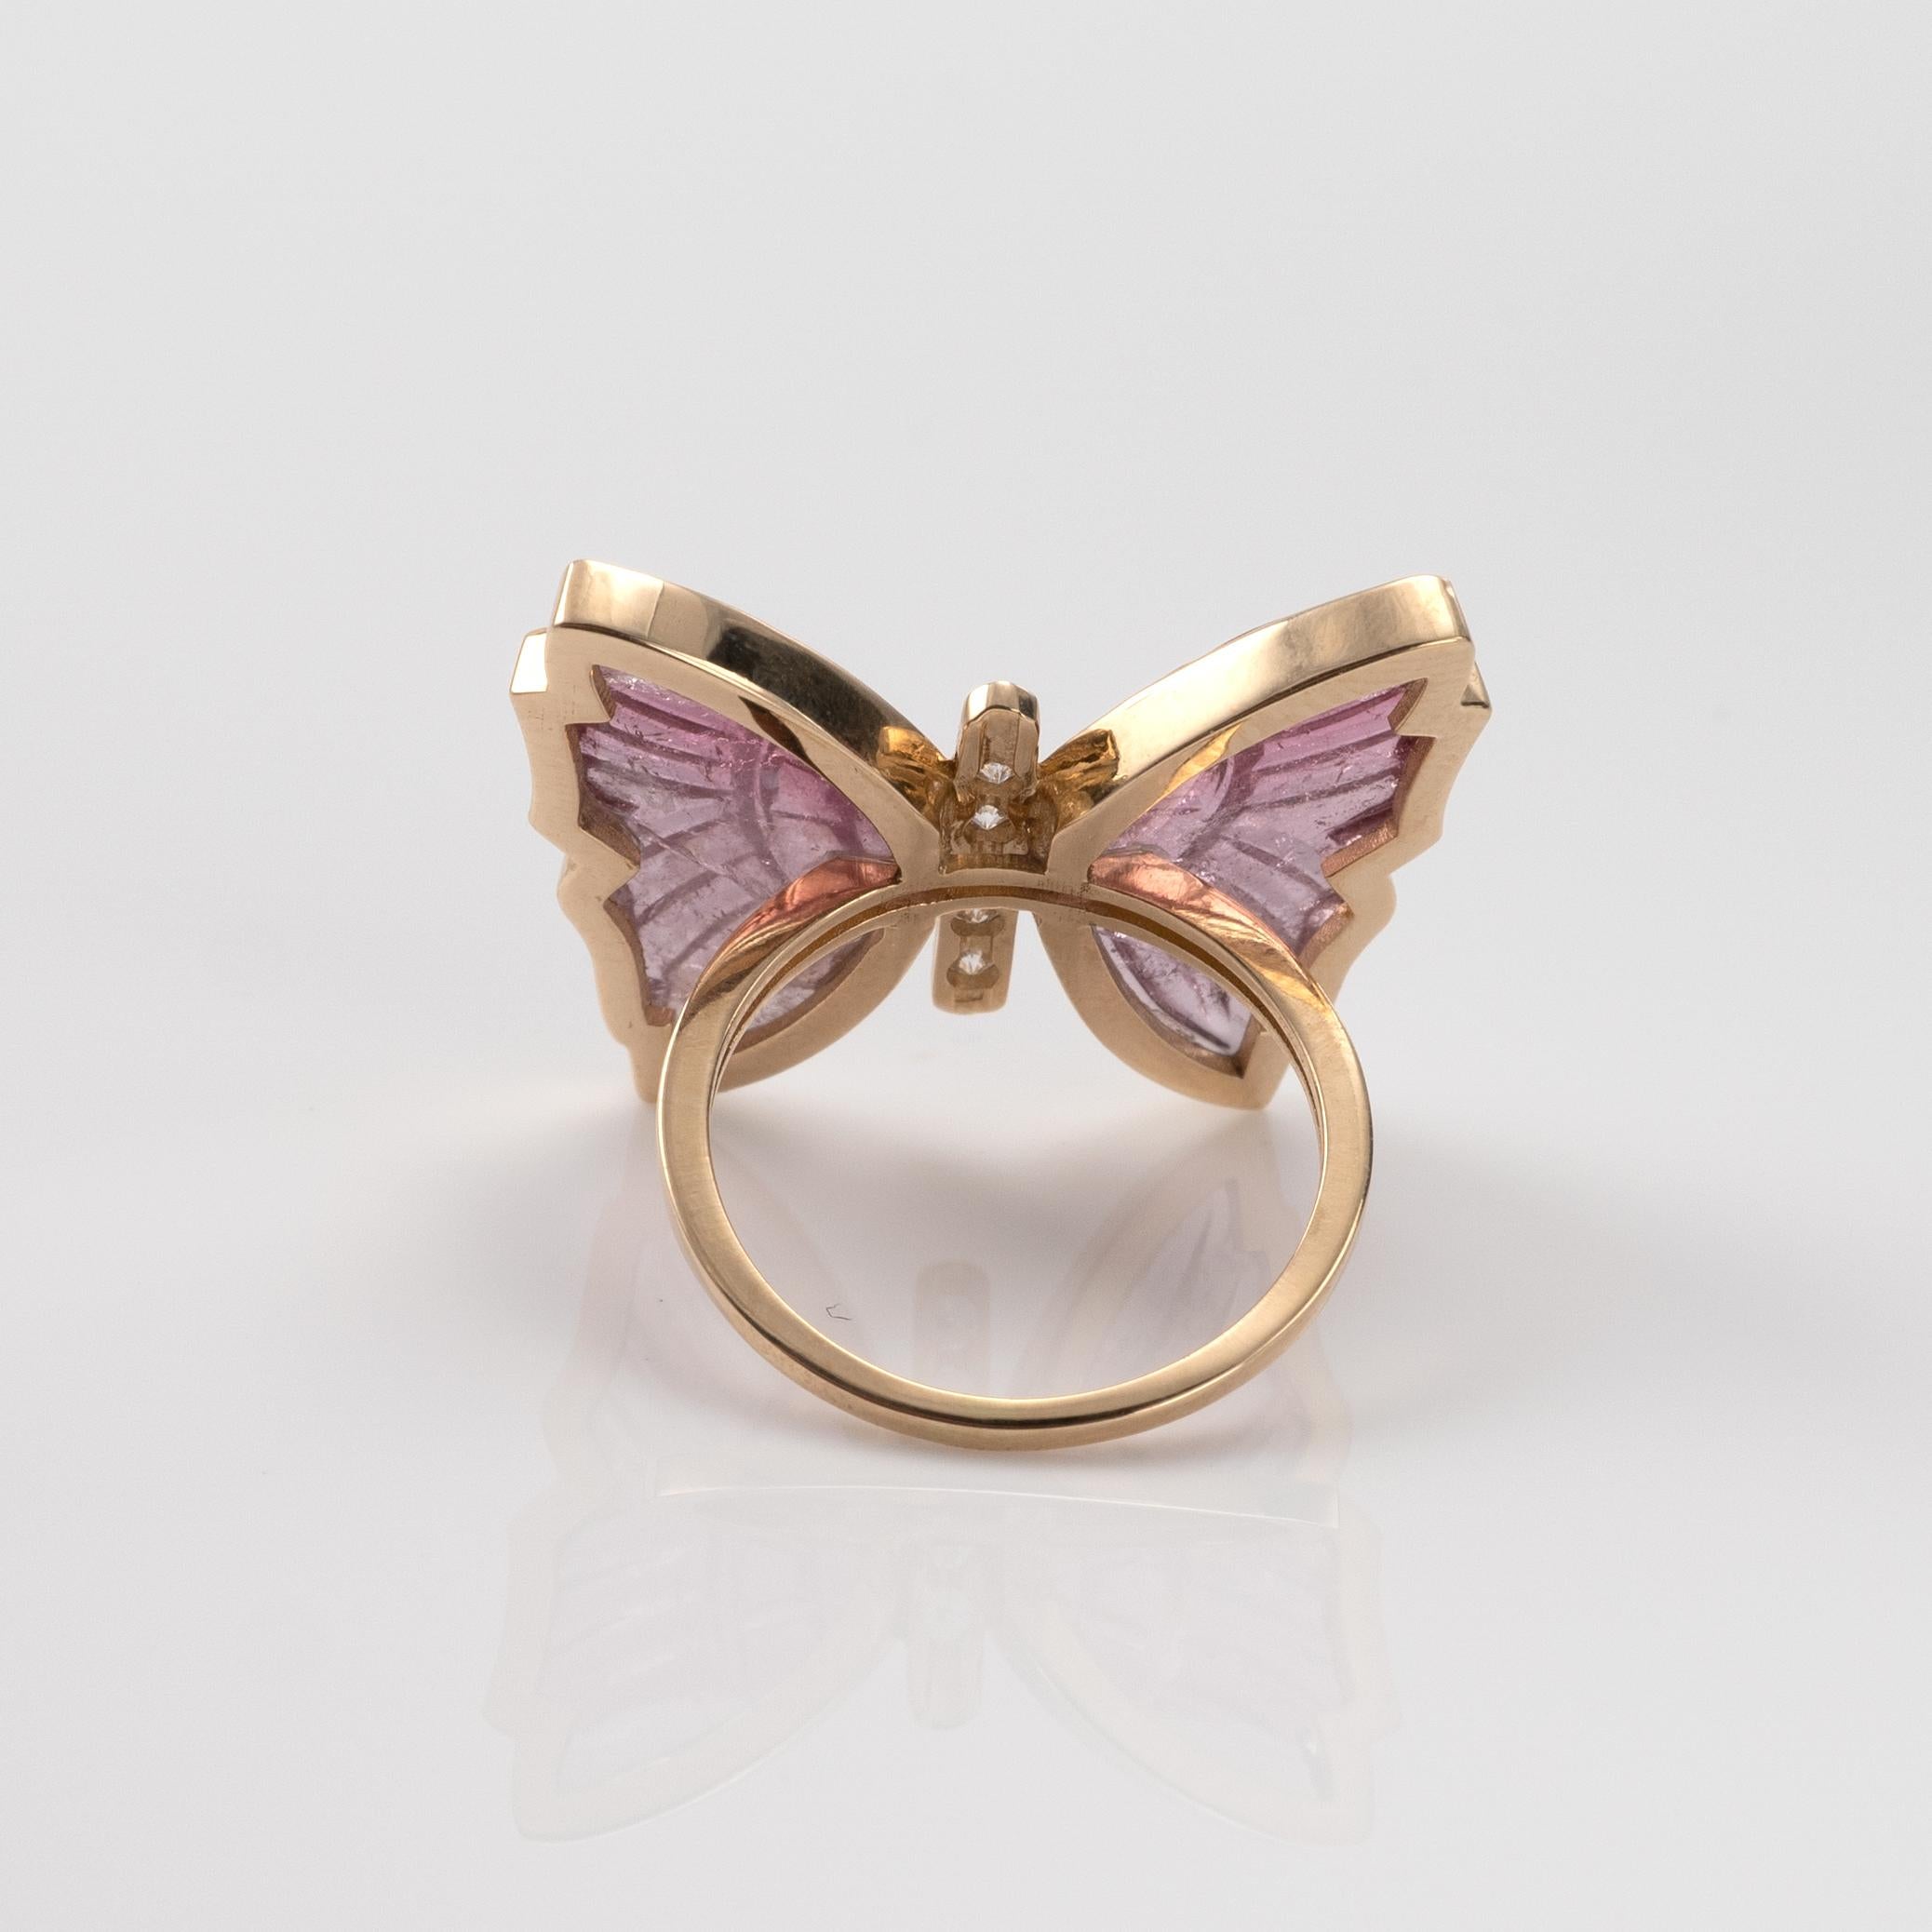 Pink Tourmaline Butterfly Ring with Diamonds, Crafted in 14 Karat Yellow Gold 1